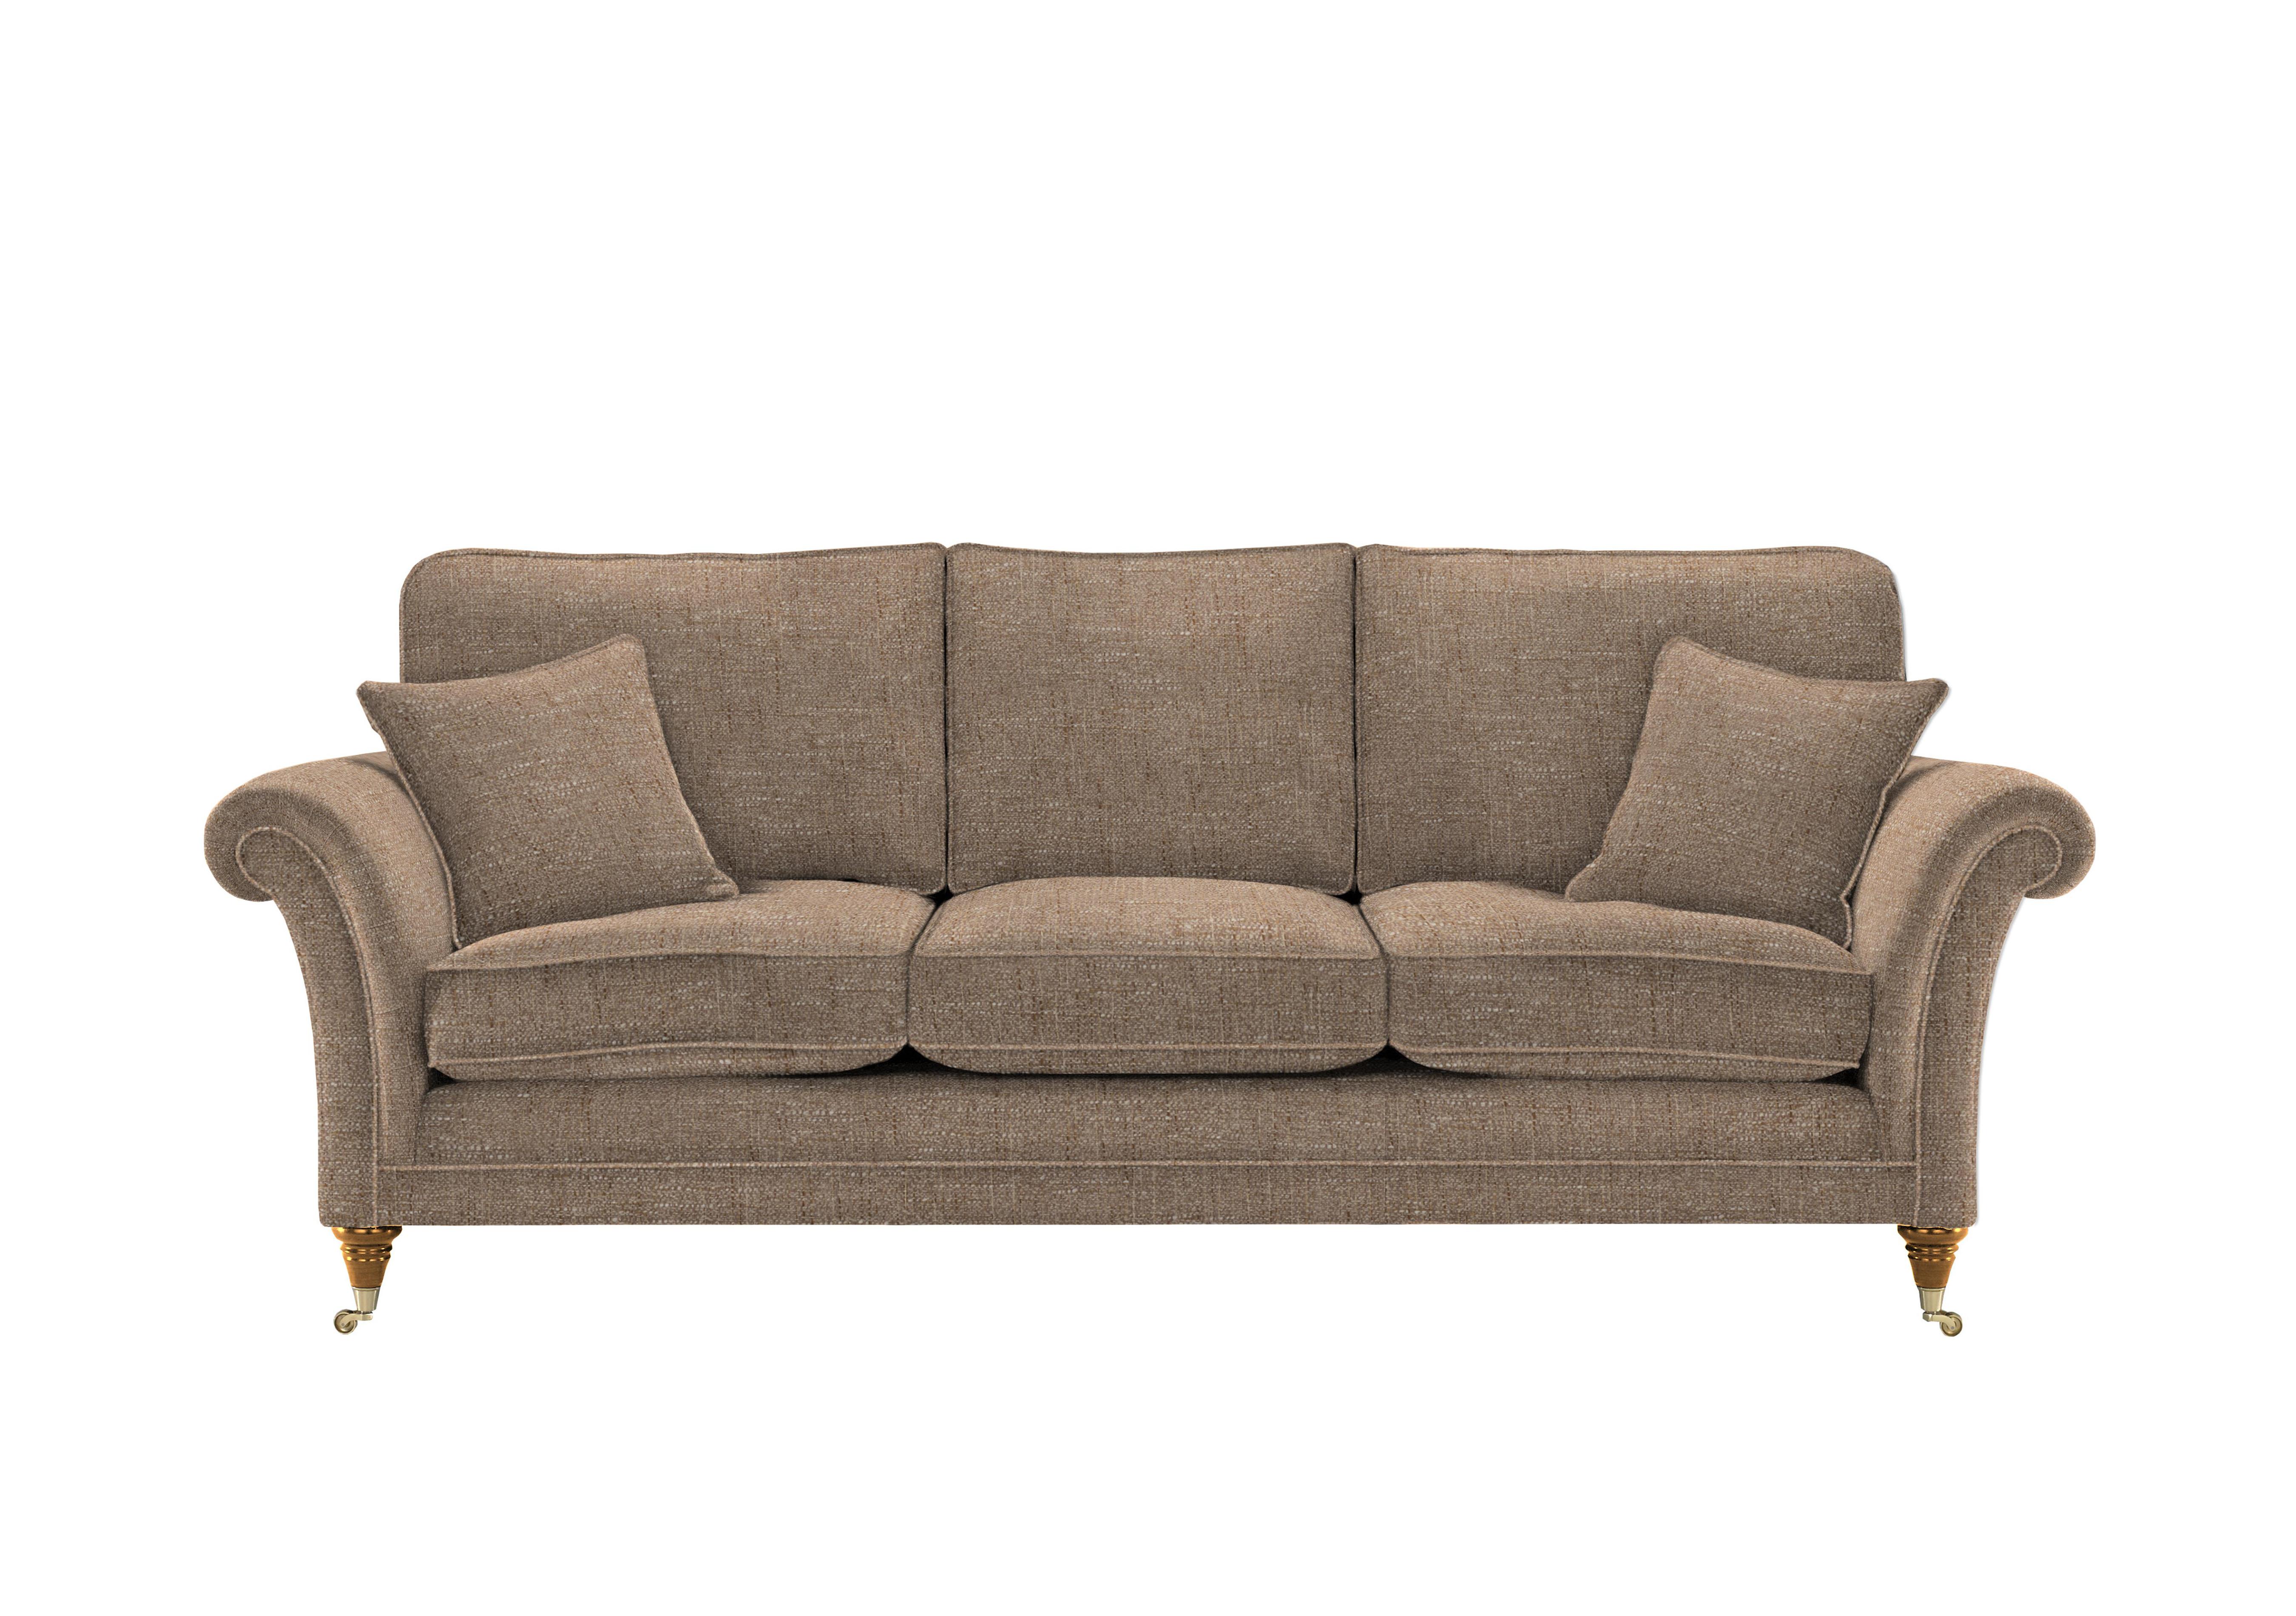 Burghley Grand 3 Seater Sofa in 001408-0051 Country Oatmeal on Furniture Village